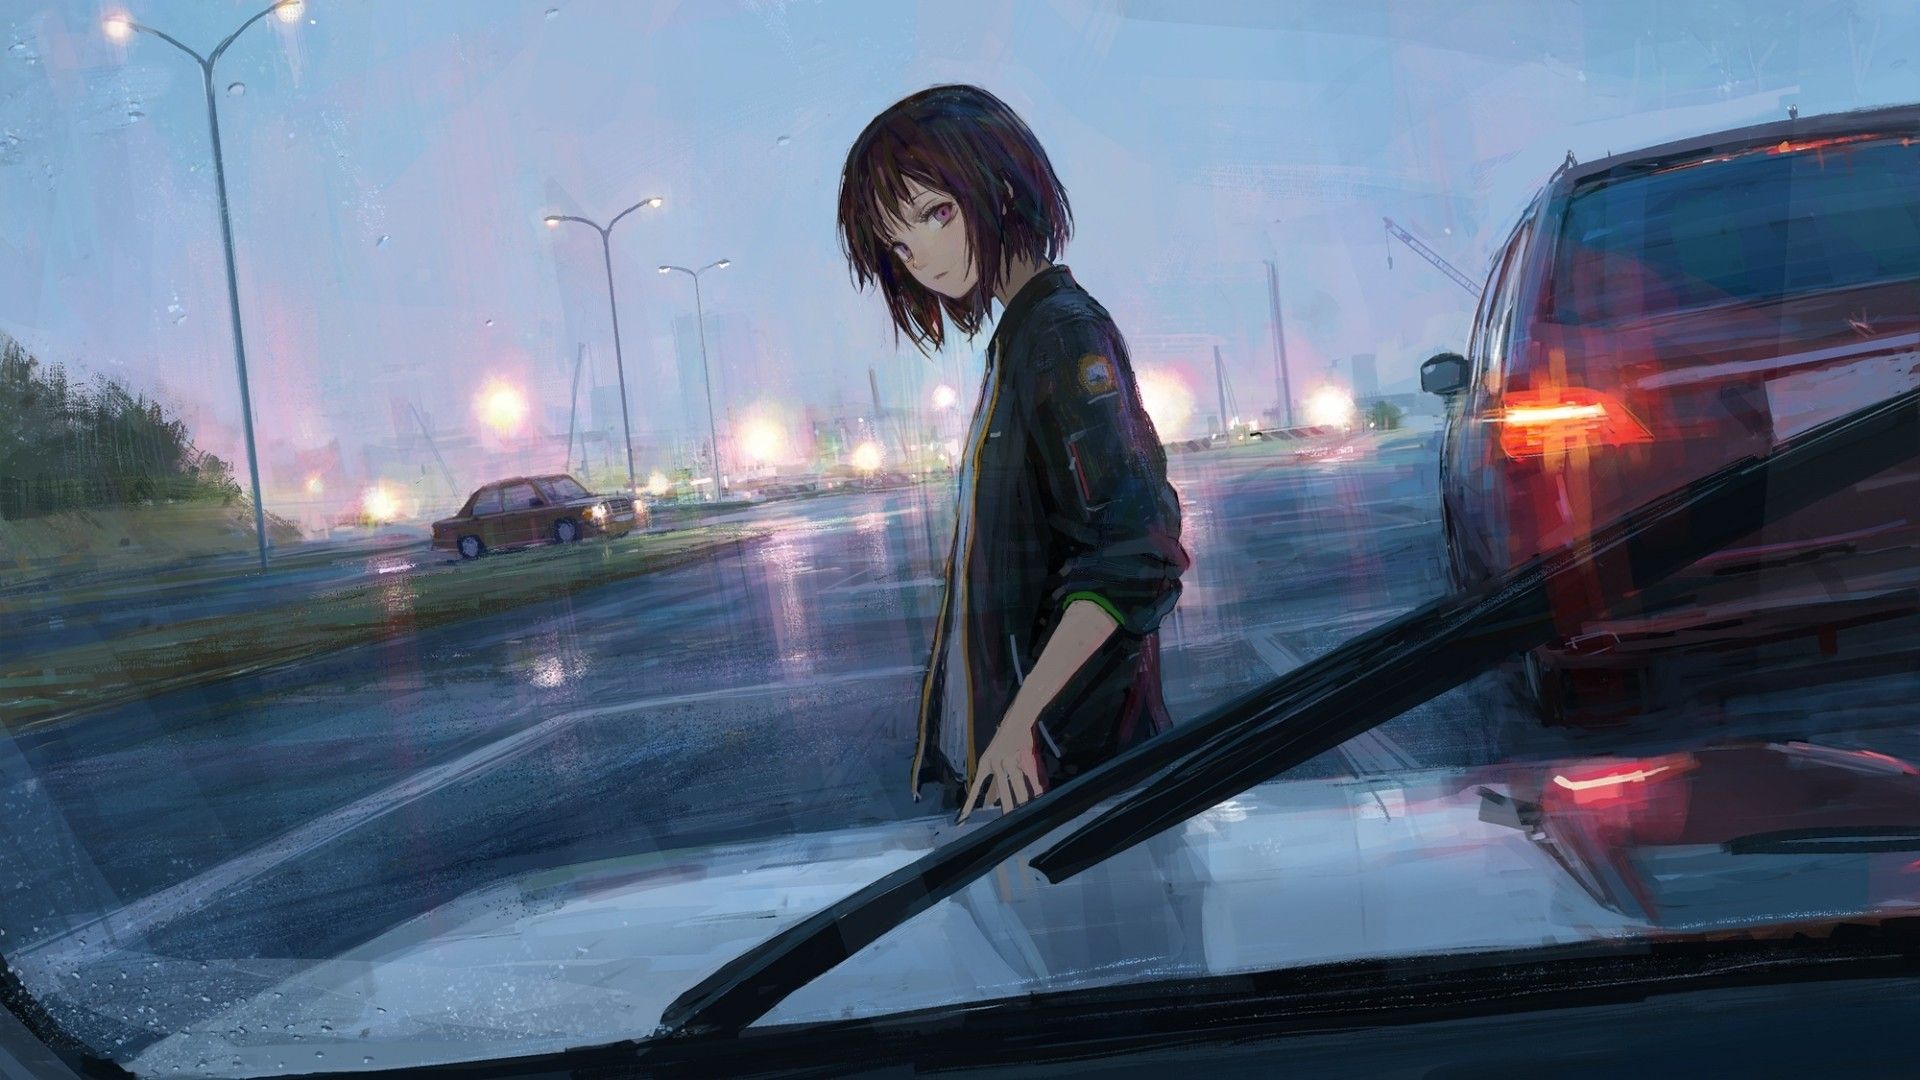 Download 1920x1080 Anime Girl, Cars, Painting, Road, Lights, Short